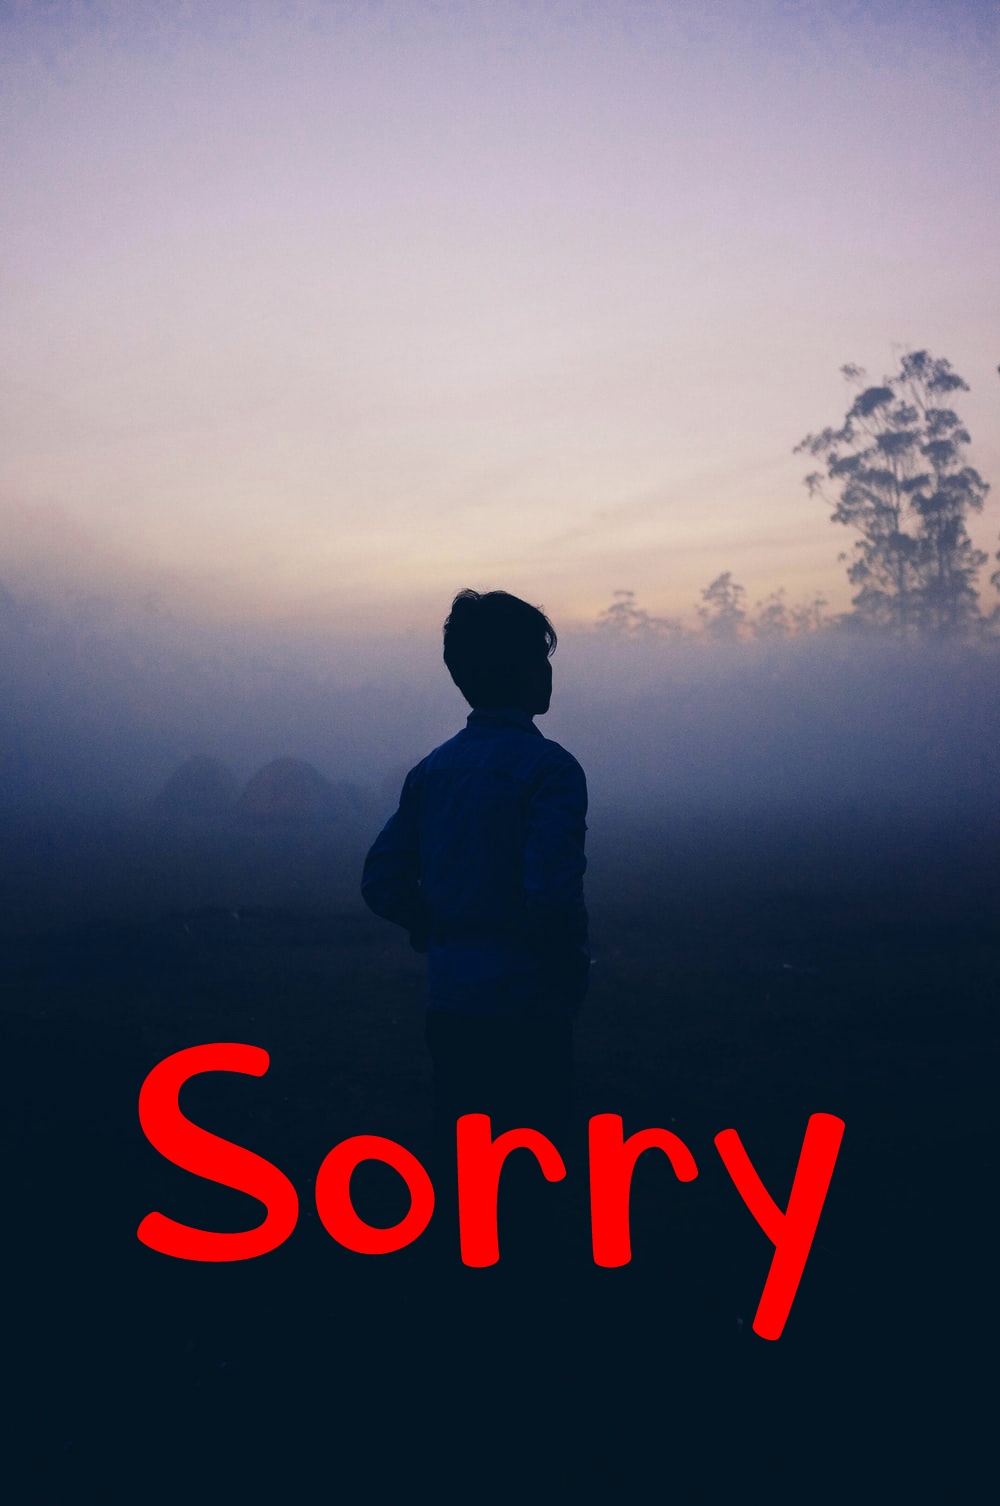 I am Sorry Images photo pics Free Download 